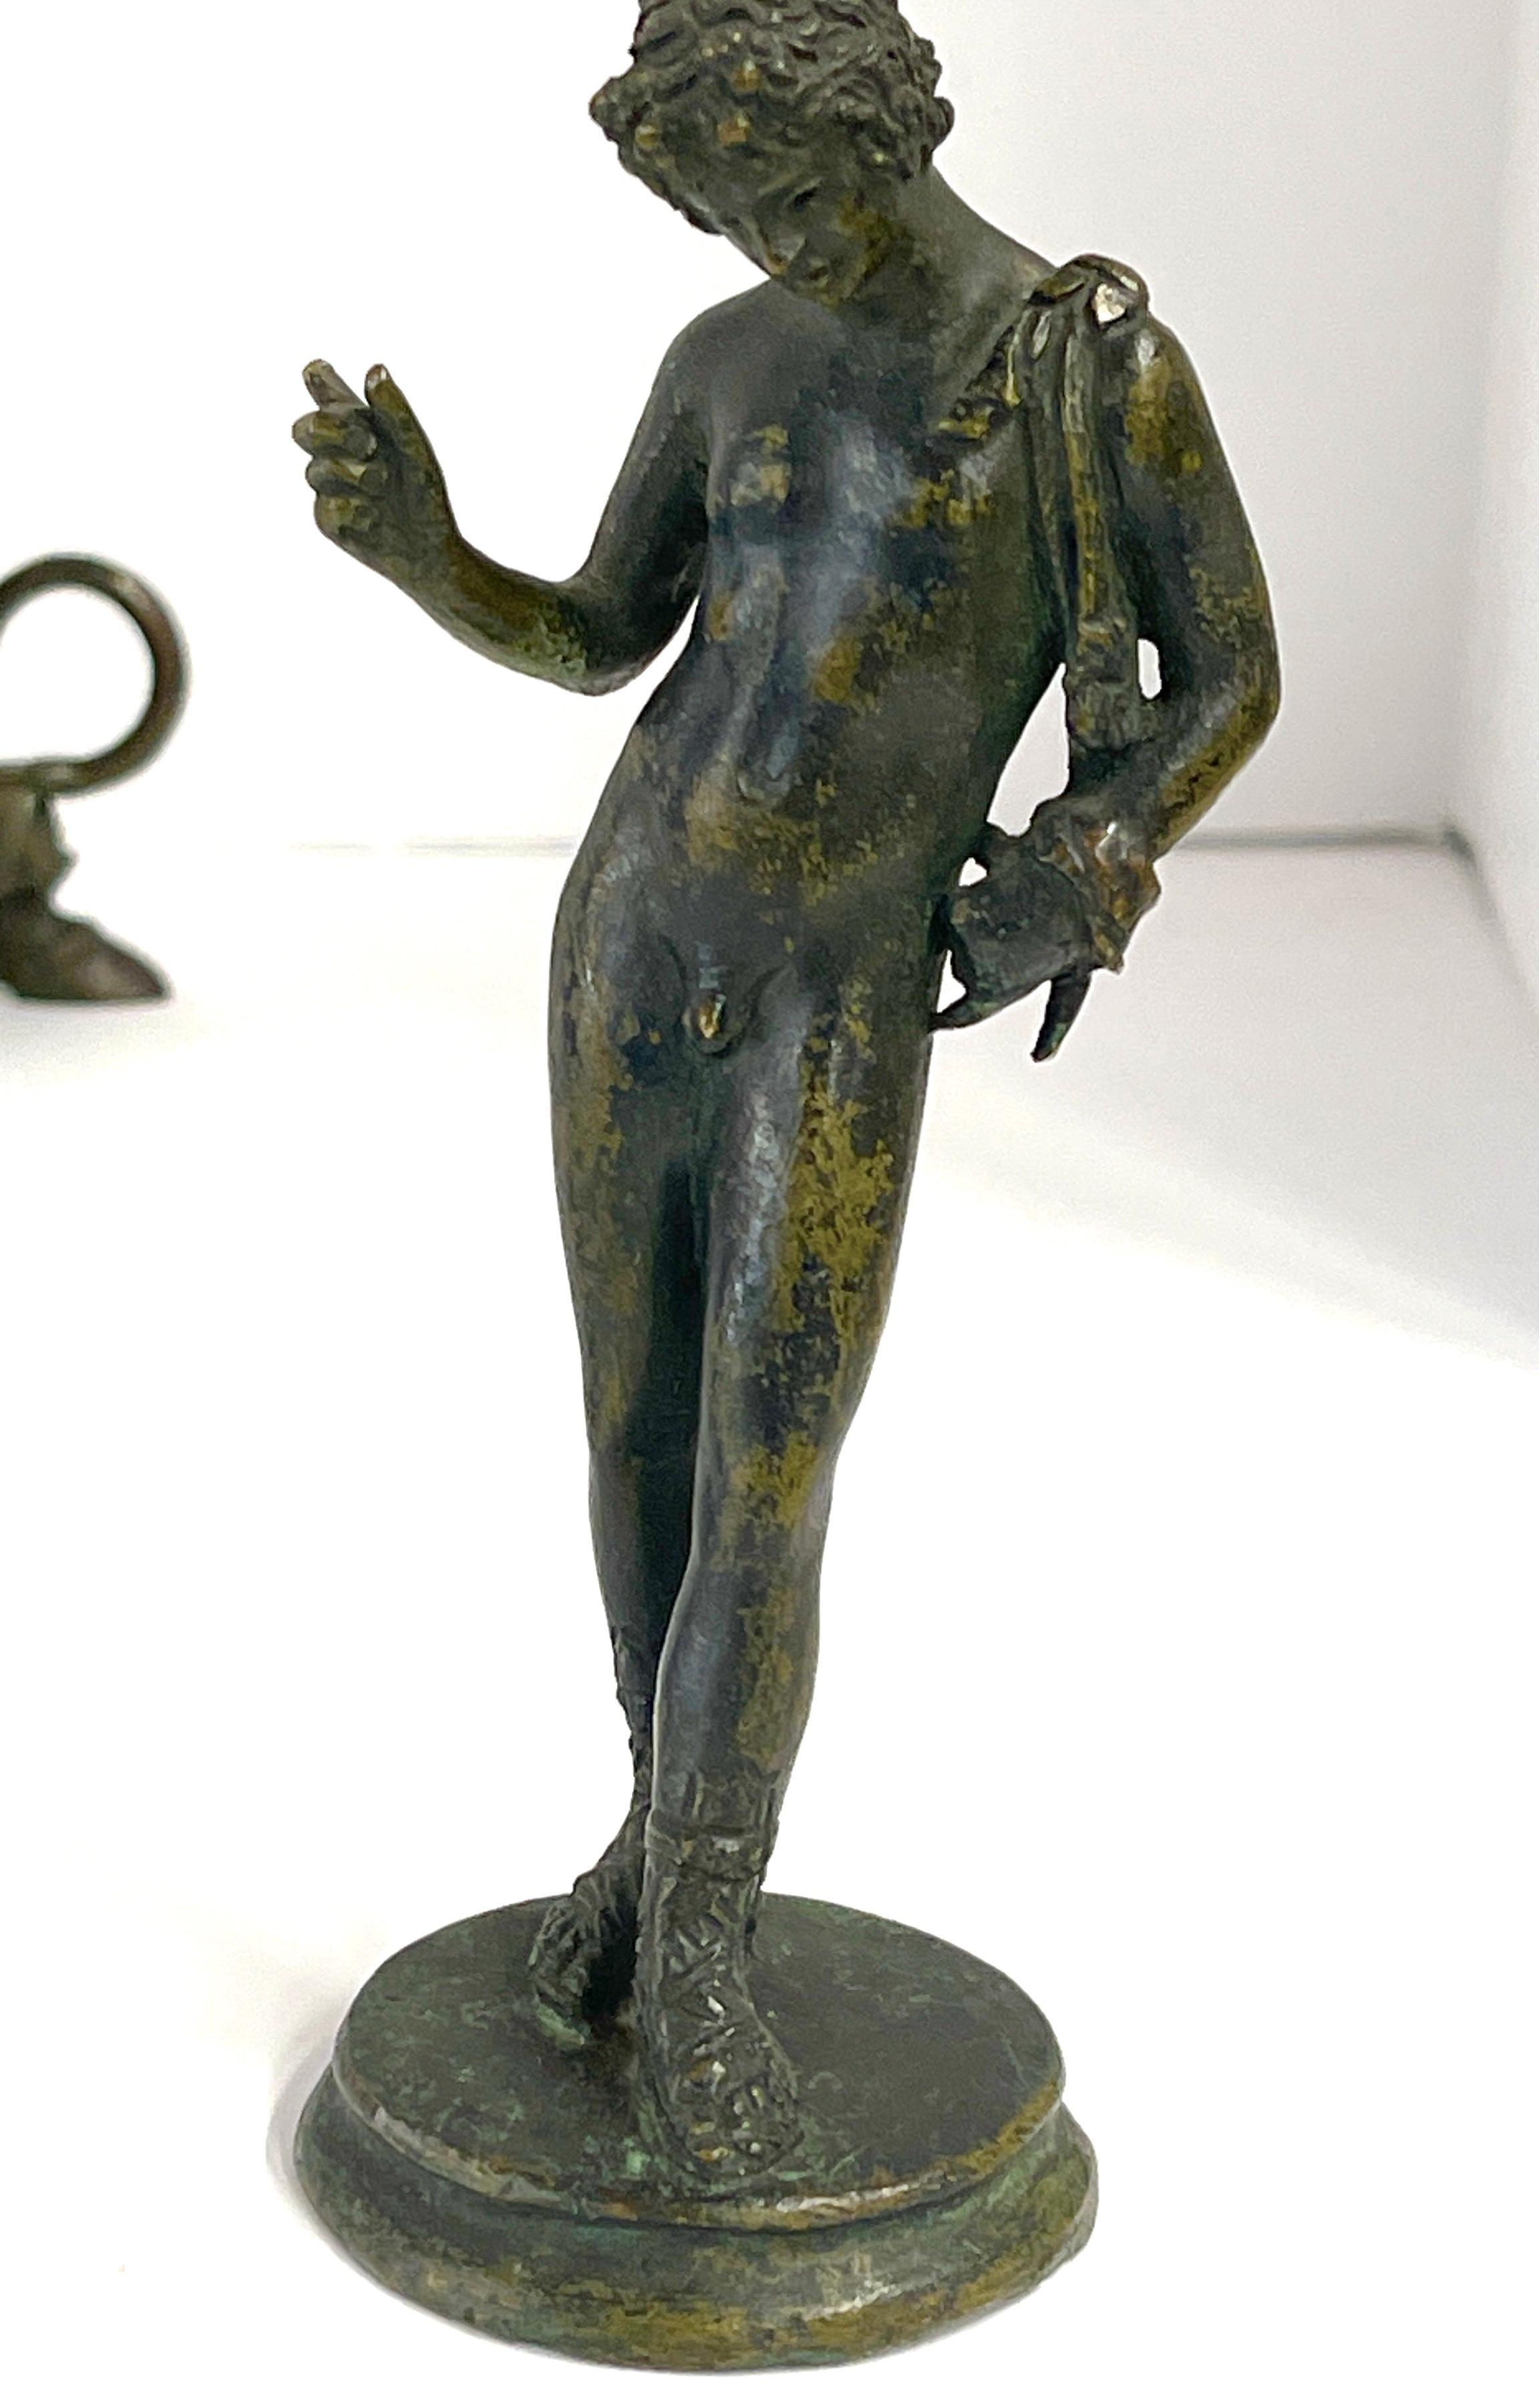 Italian Collection of Diminutive Grand Tour Bronzes